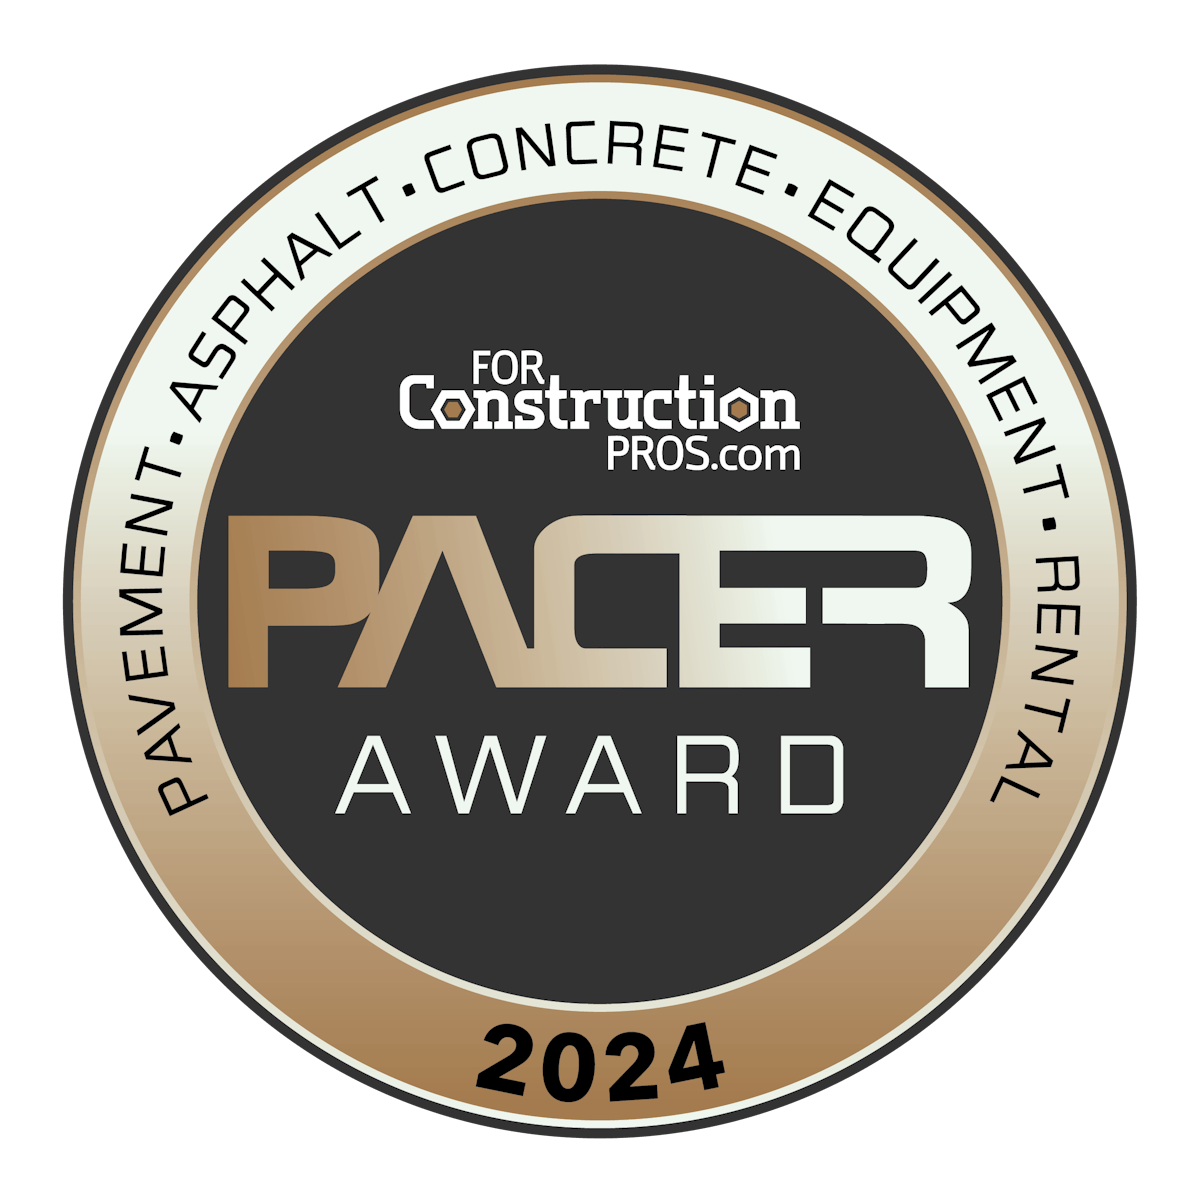 PACER Award: ForConstructionPros.com Recognizes Construction Pros with New Award